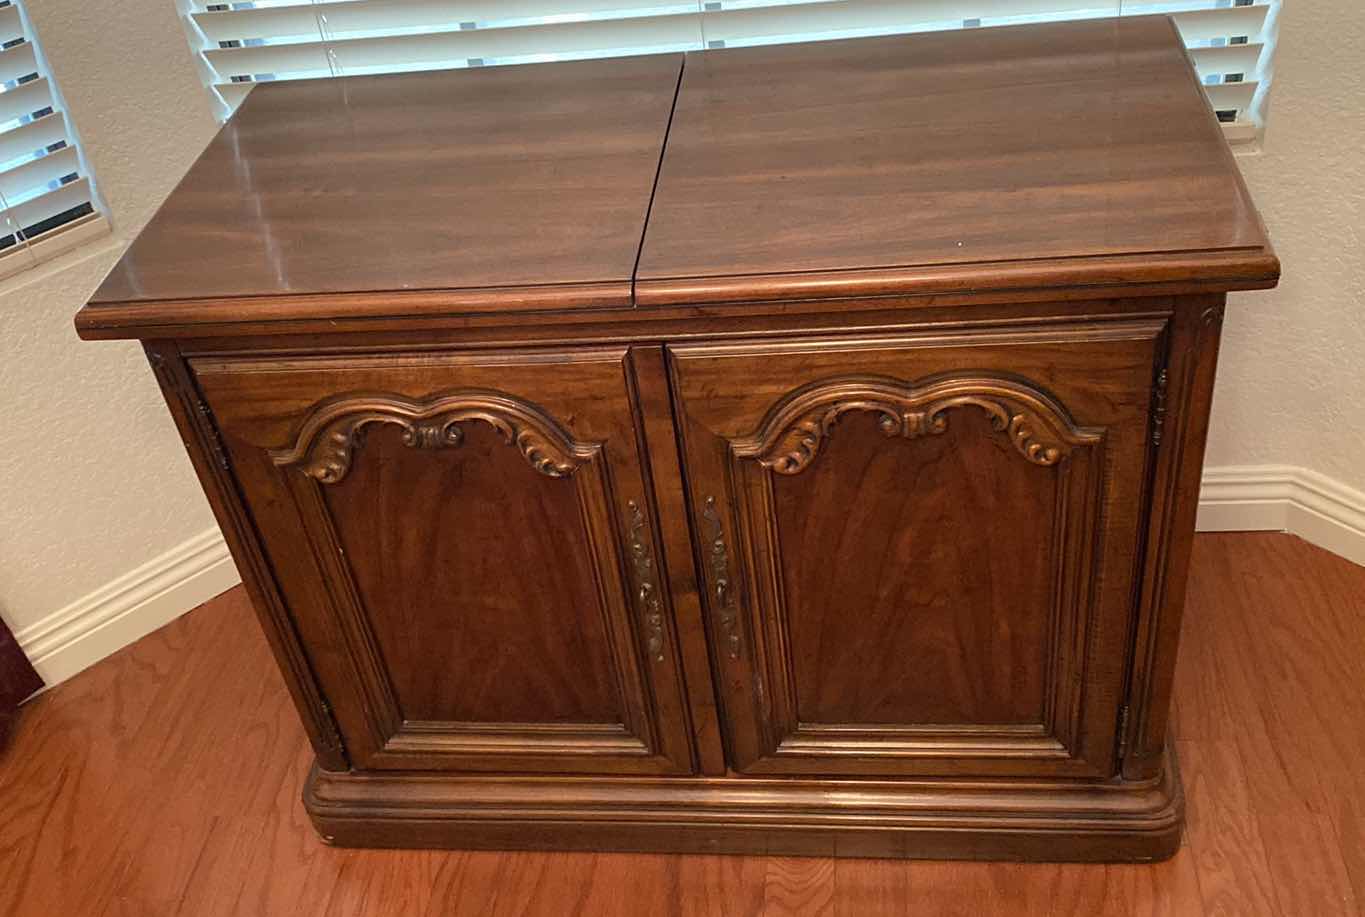 Photo 1 of WOOD BUFFET 39“ x 18“ H 30 1/2” TOP OPENS ( NEEDS NEW HINGES)